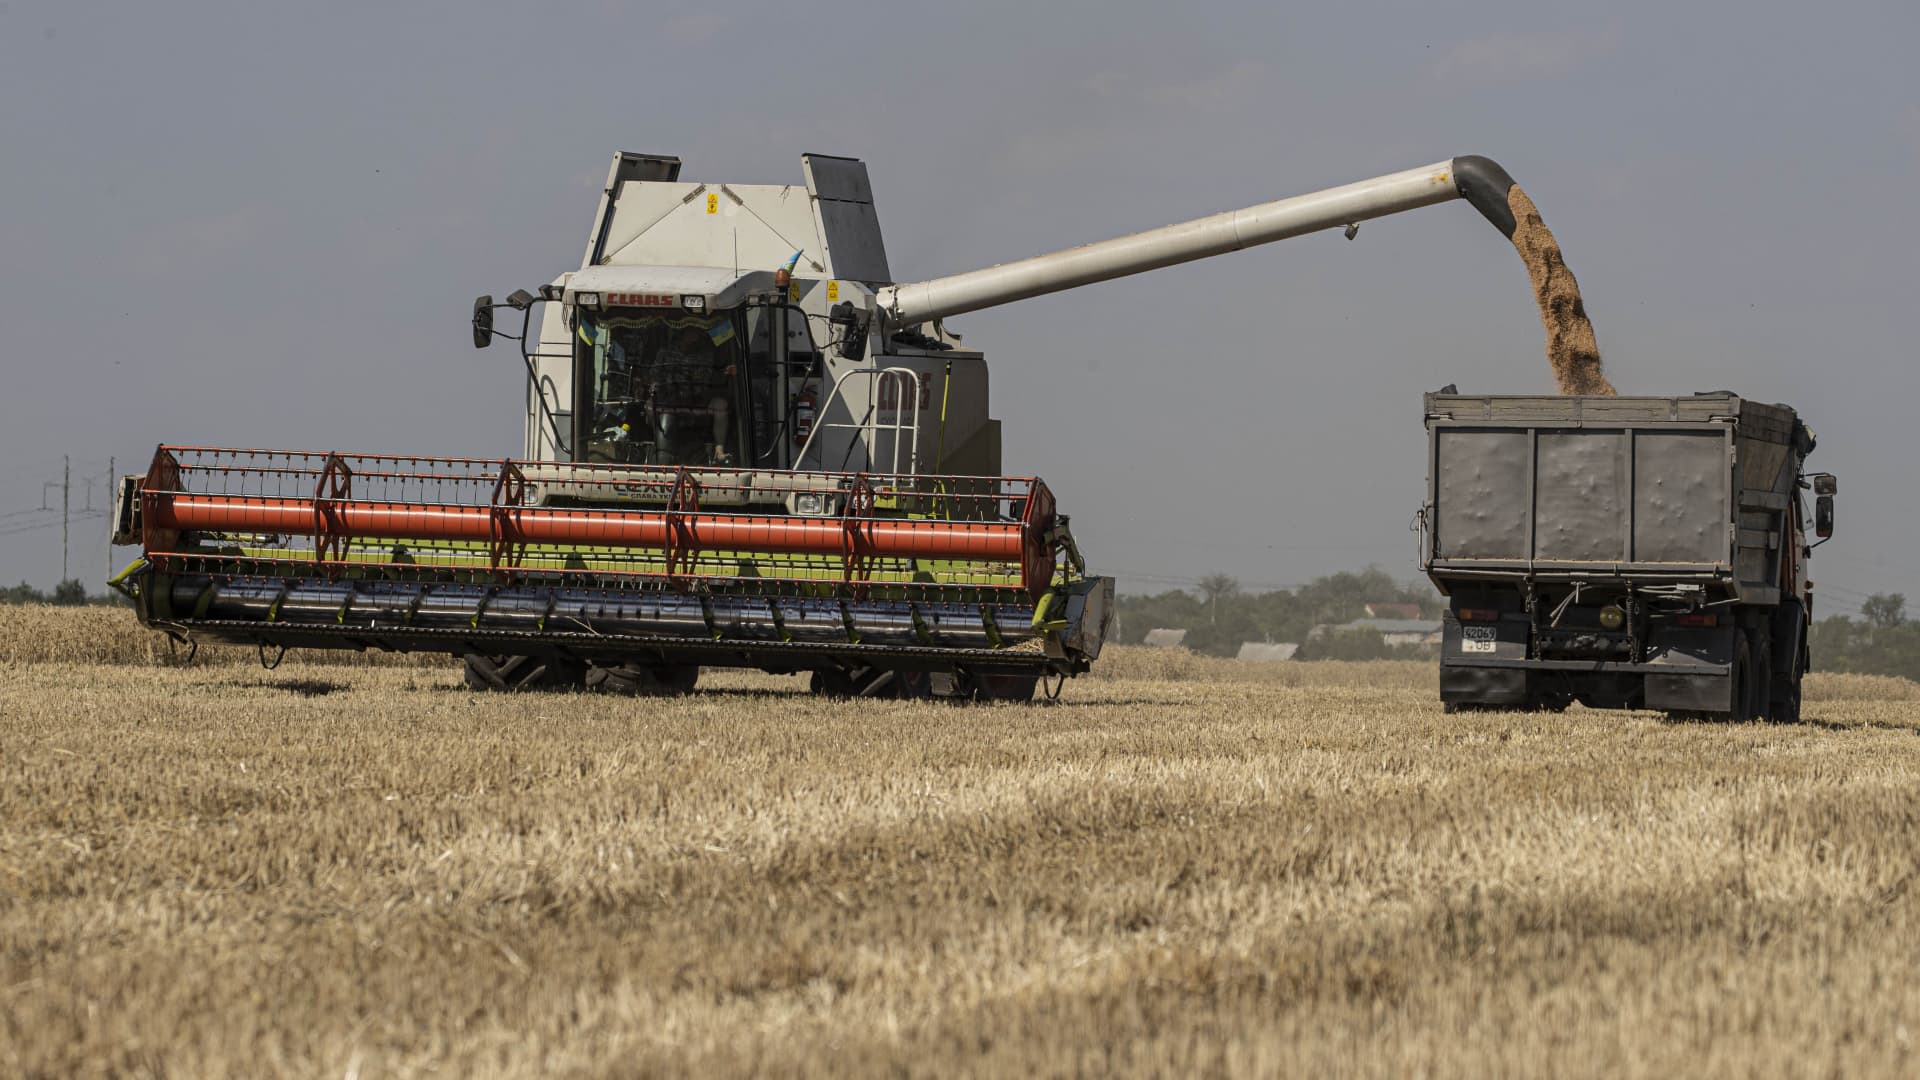 A farm implement harvests grain in the field, as Russian-Ukrainian war continues in Odesa, Ukraine on July 04, 2022.